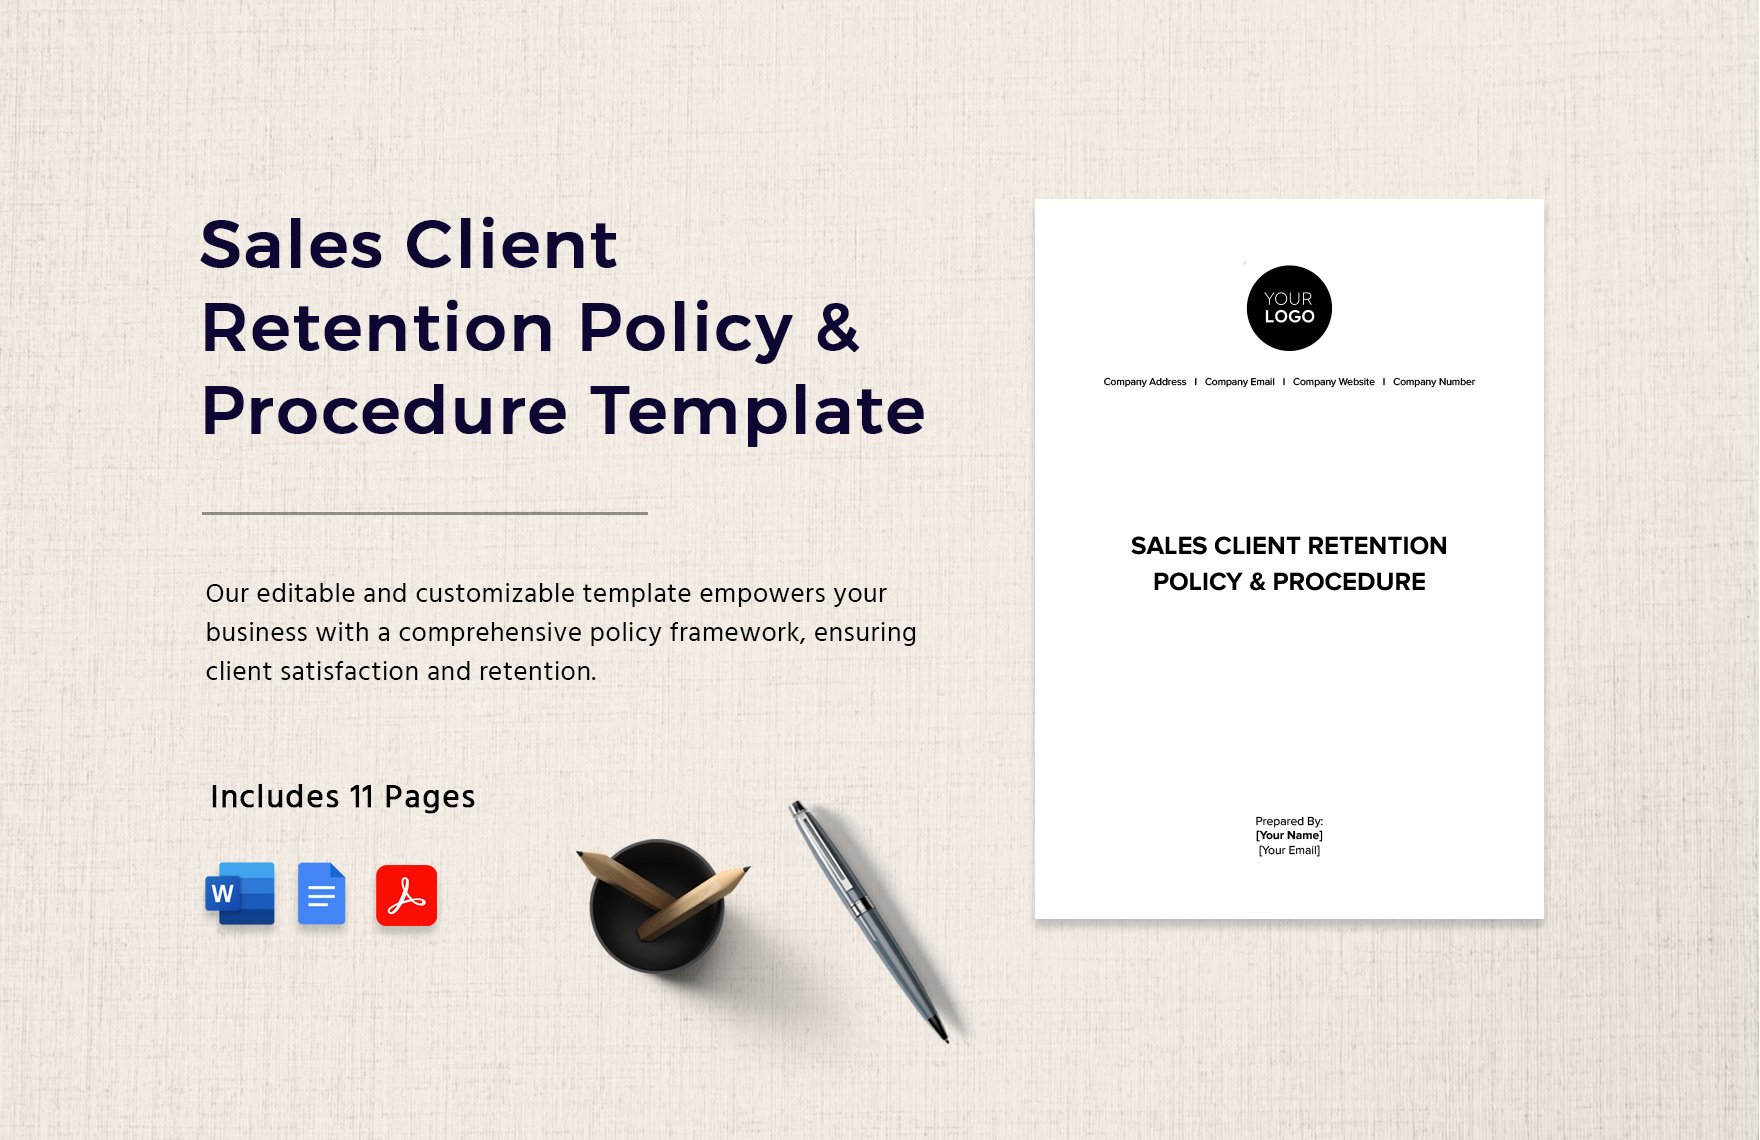 Sales Client Retention Policy & Procedure Template in Word, Google Docs, PDF